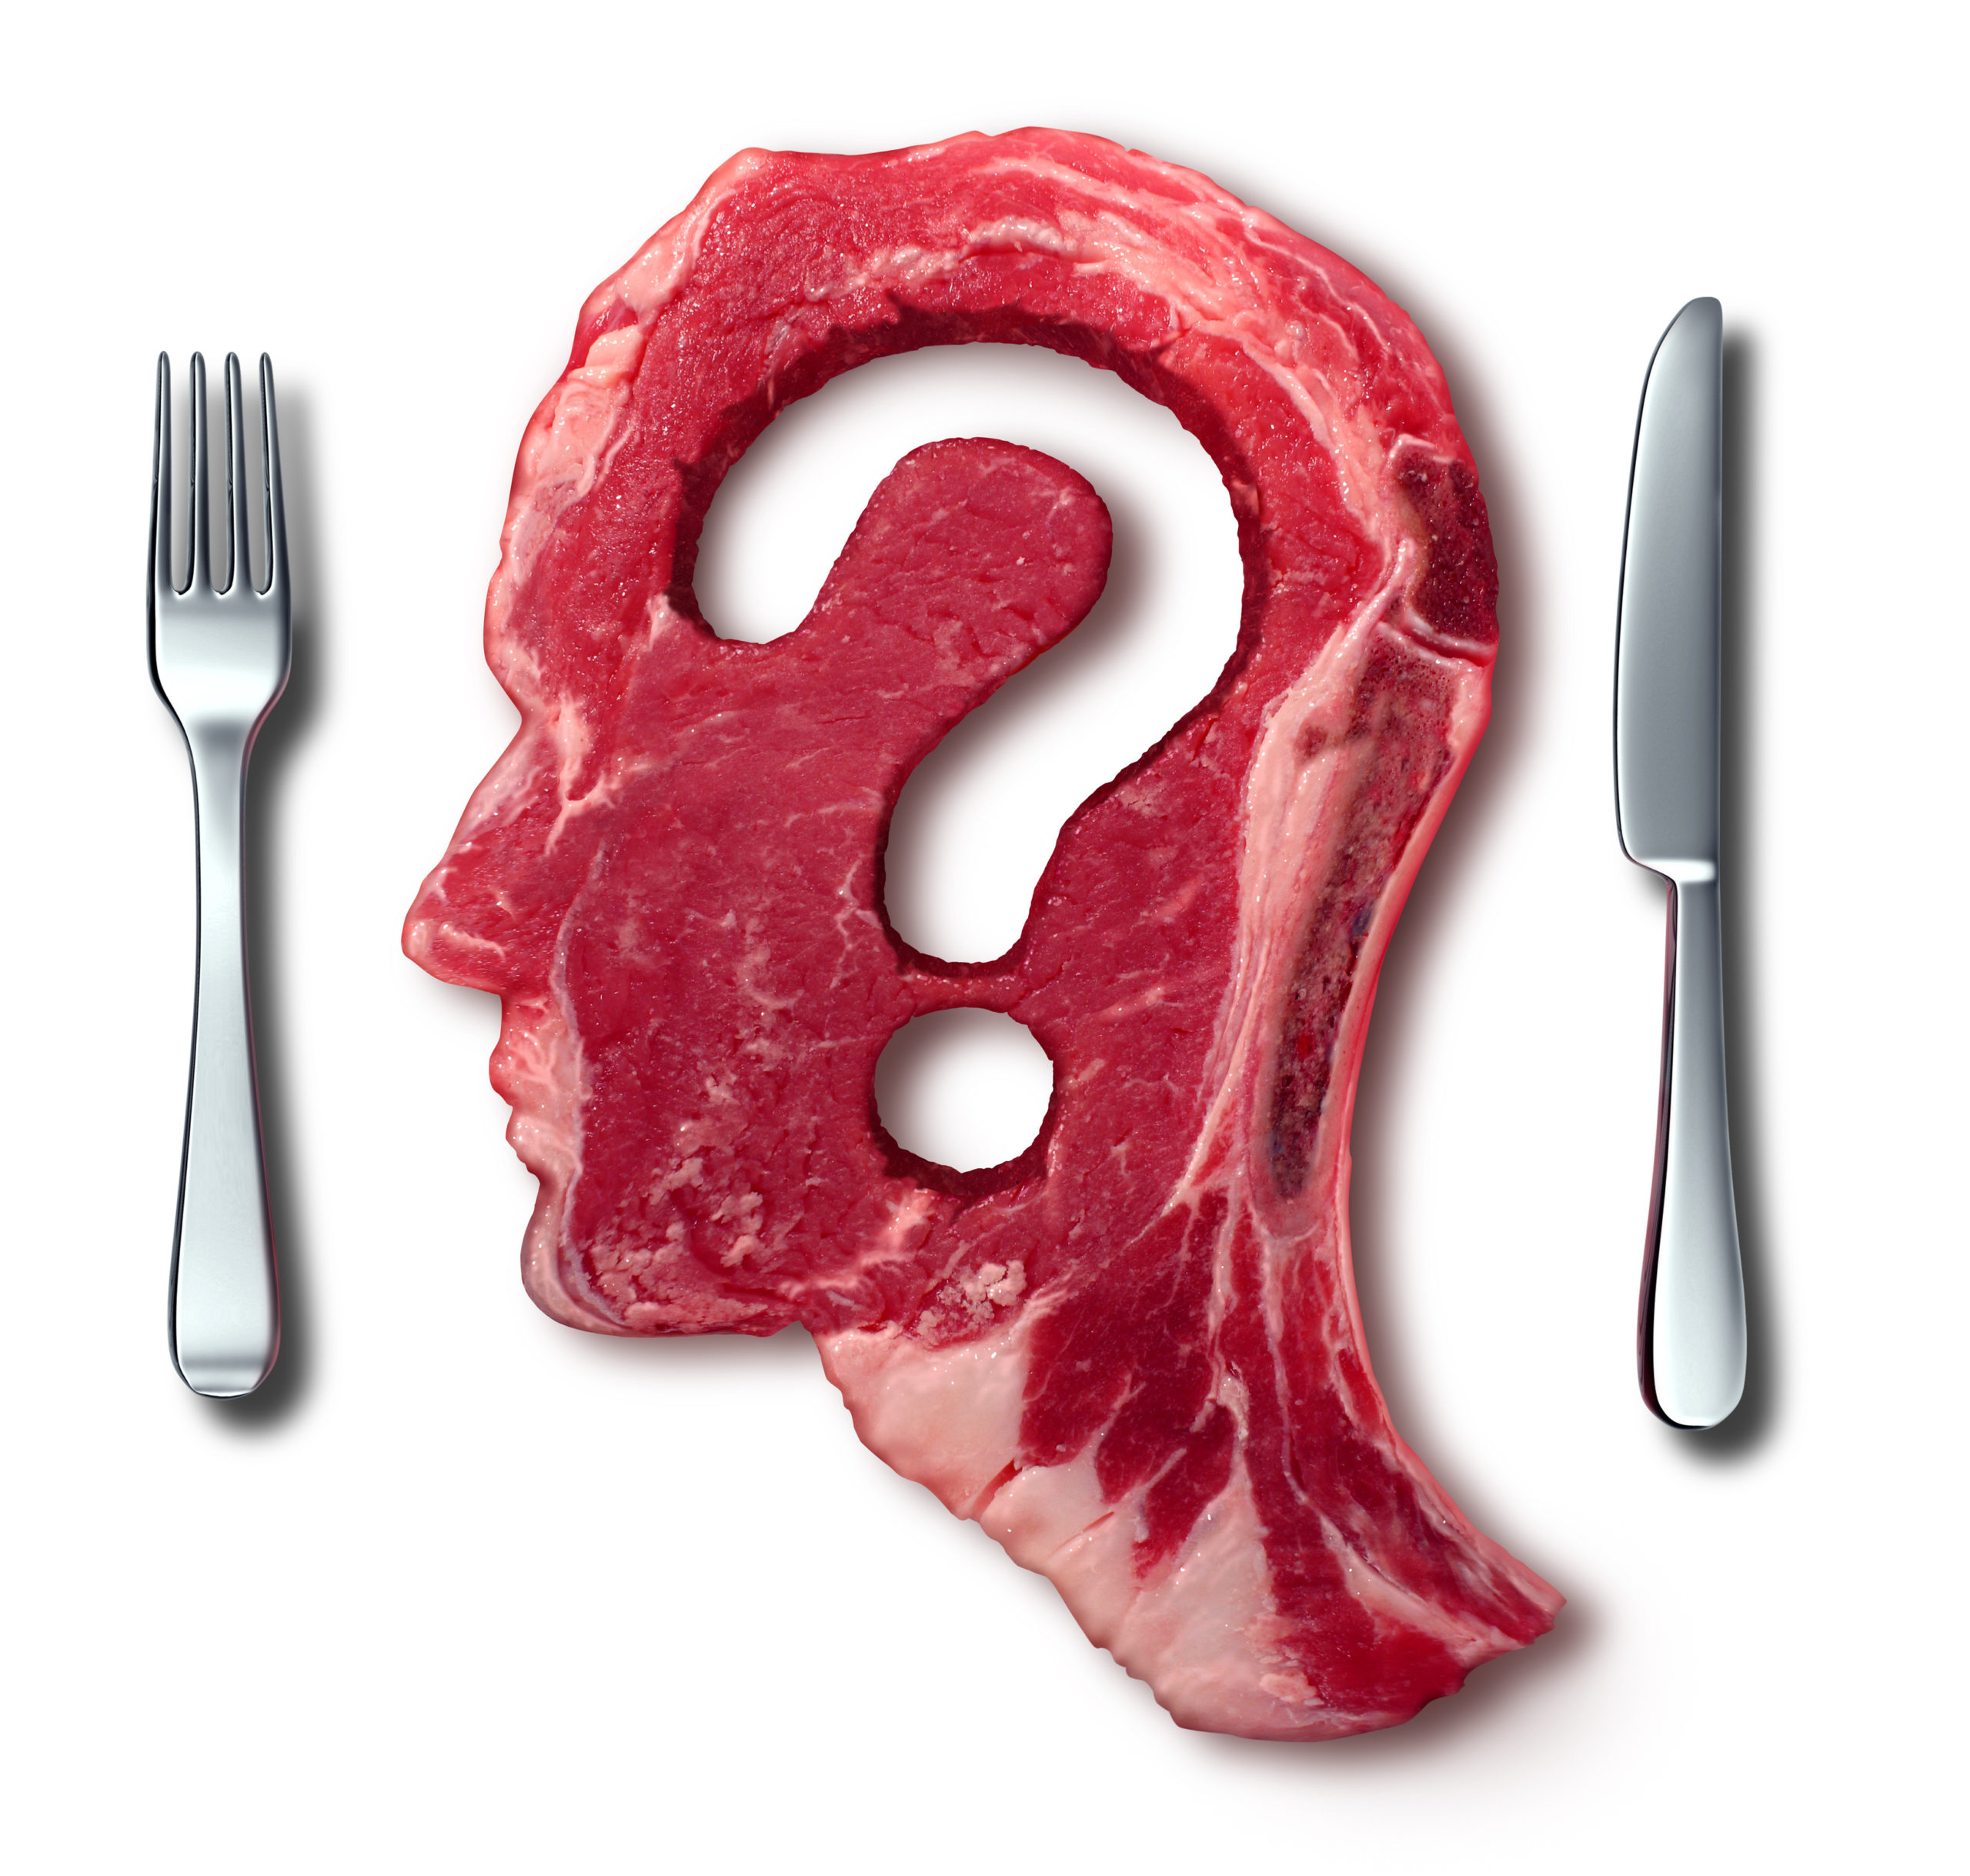 Eating Meat Good or Bad? By Dr. Veronique Desaulniers